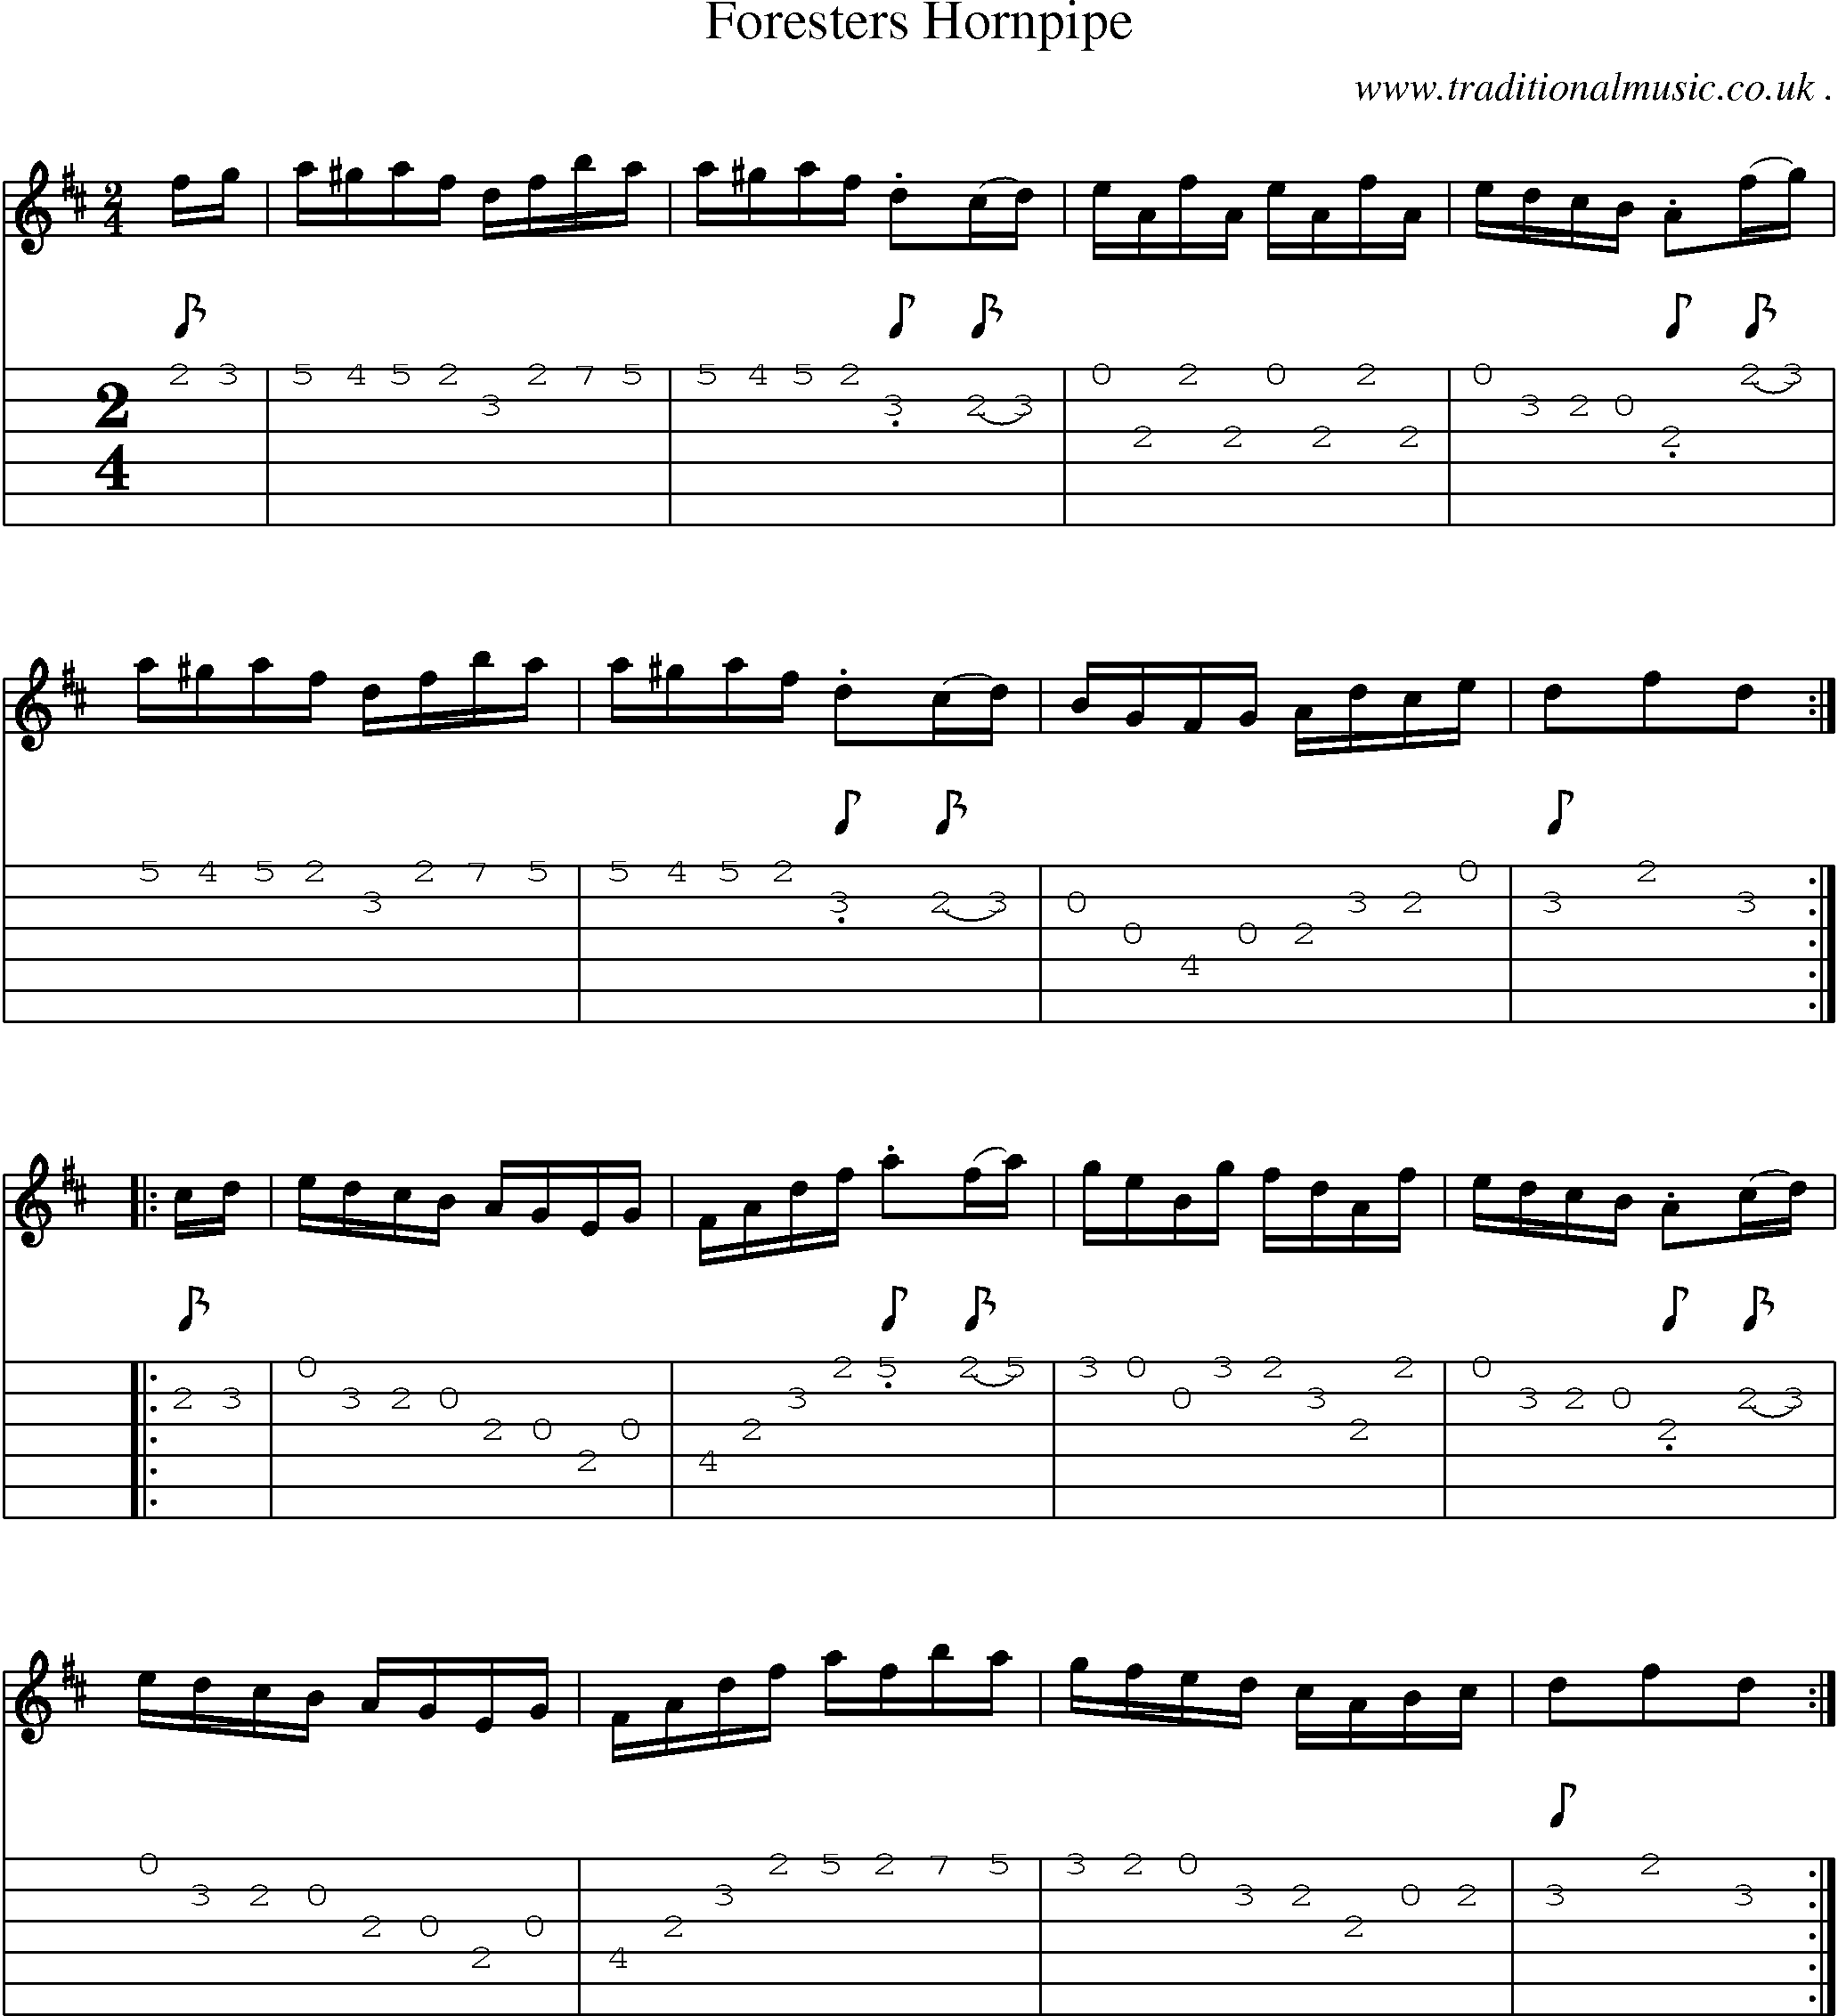 Sheet-Music and Guitar Tabs for Foresters Hornpipe